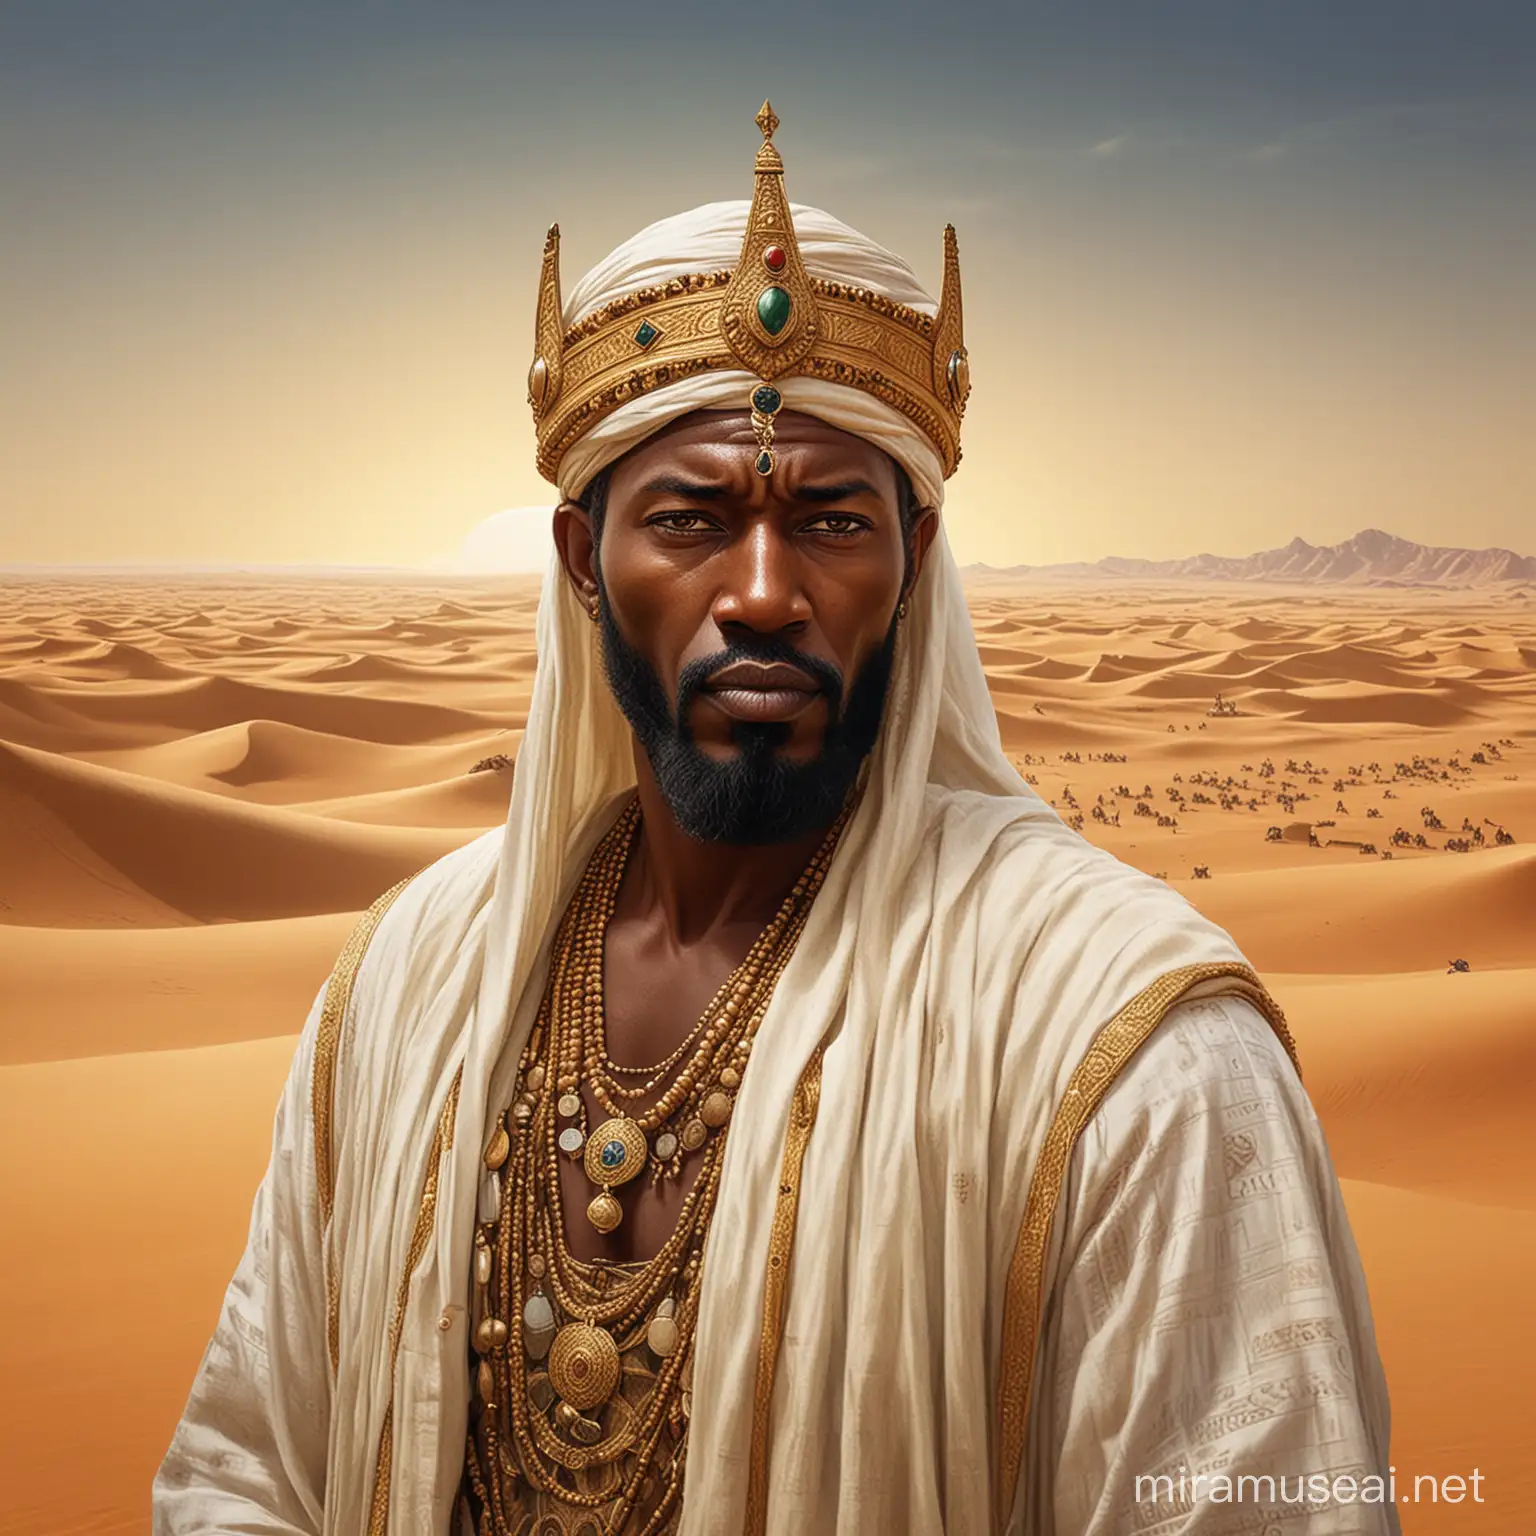 Create an image of Mansa Musa, the wealthy 14th-century ruler of the Mali Empire, depicted with a resolute and determined expression. He should be portrayed looking towards the horizon, symbolizing his vision and ambition. Mansa Musa should be adorned in royal attire, featuring rich and elaborate African patterns, with gold jewelry that reflects his immense wealth. The background should hint at the Saharan landscape, blending historical accuracy with a touch of artistic interpretation. The overall tone of the image should convey a sense of majesty, leadership, and the pioneering spirit of one of history's most remarkable journeys.